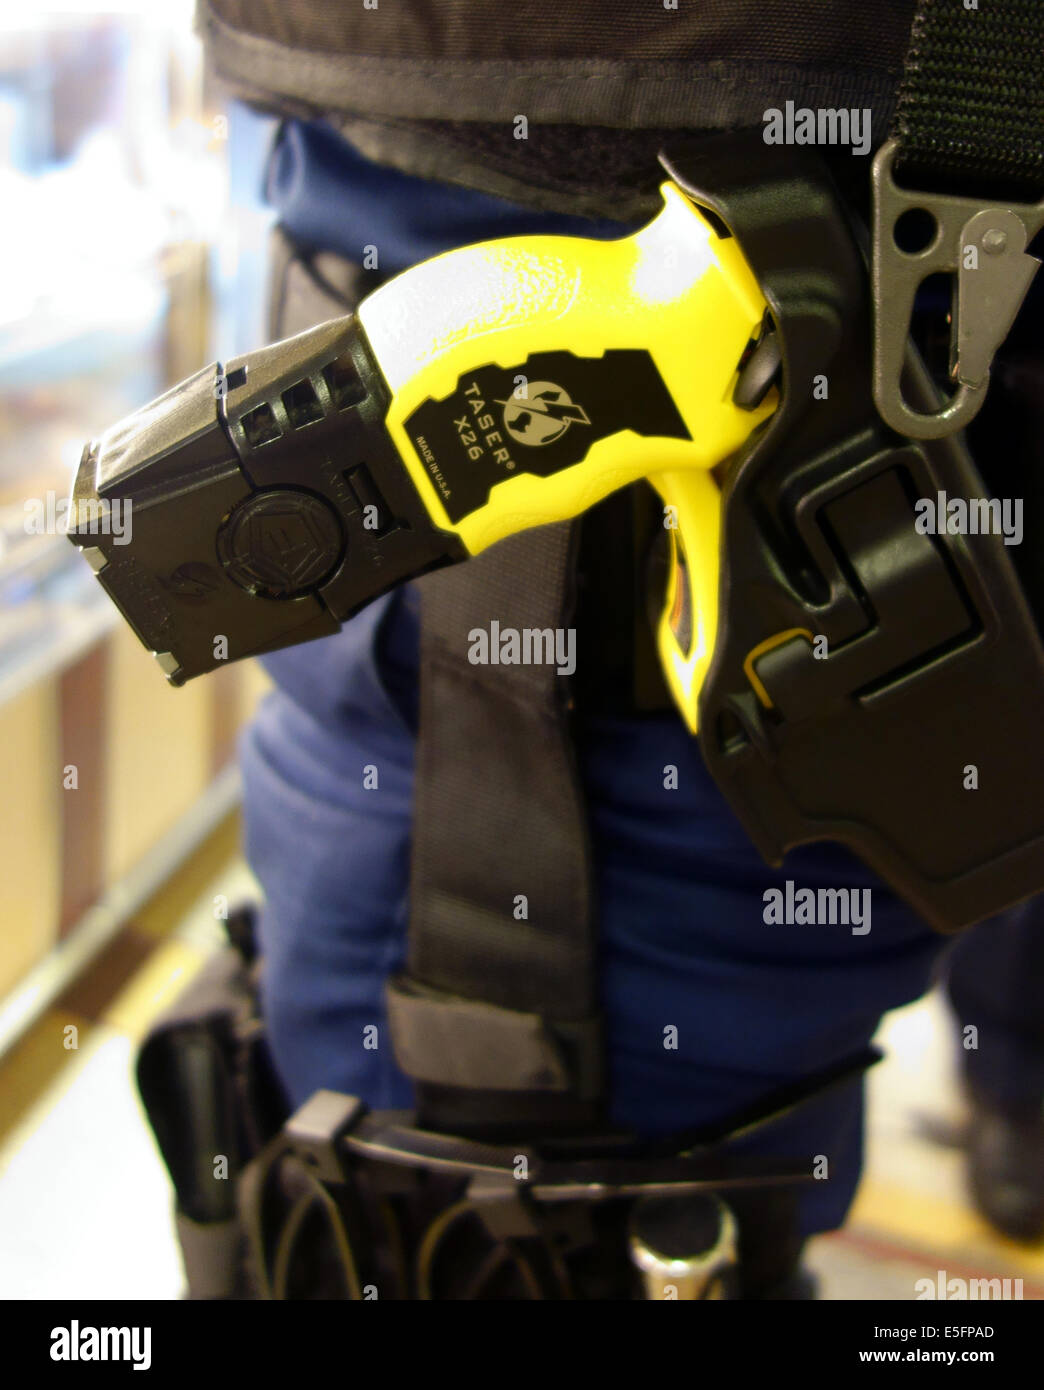 Taser in holster worn by armed police officer, Central London Stock Photo